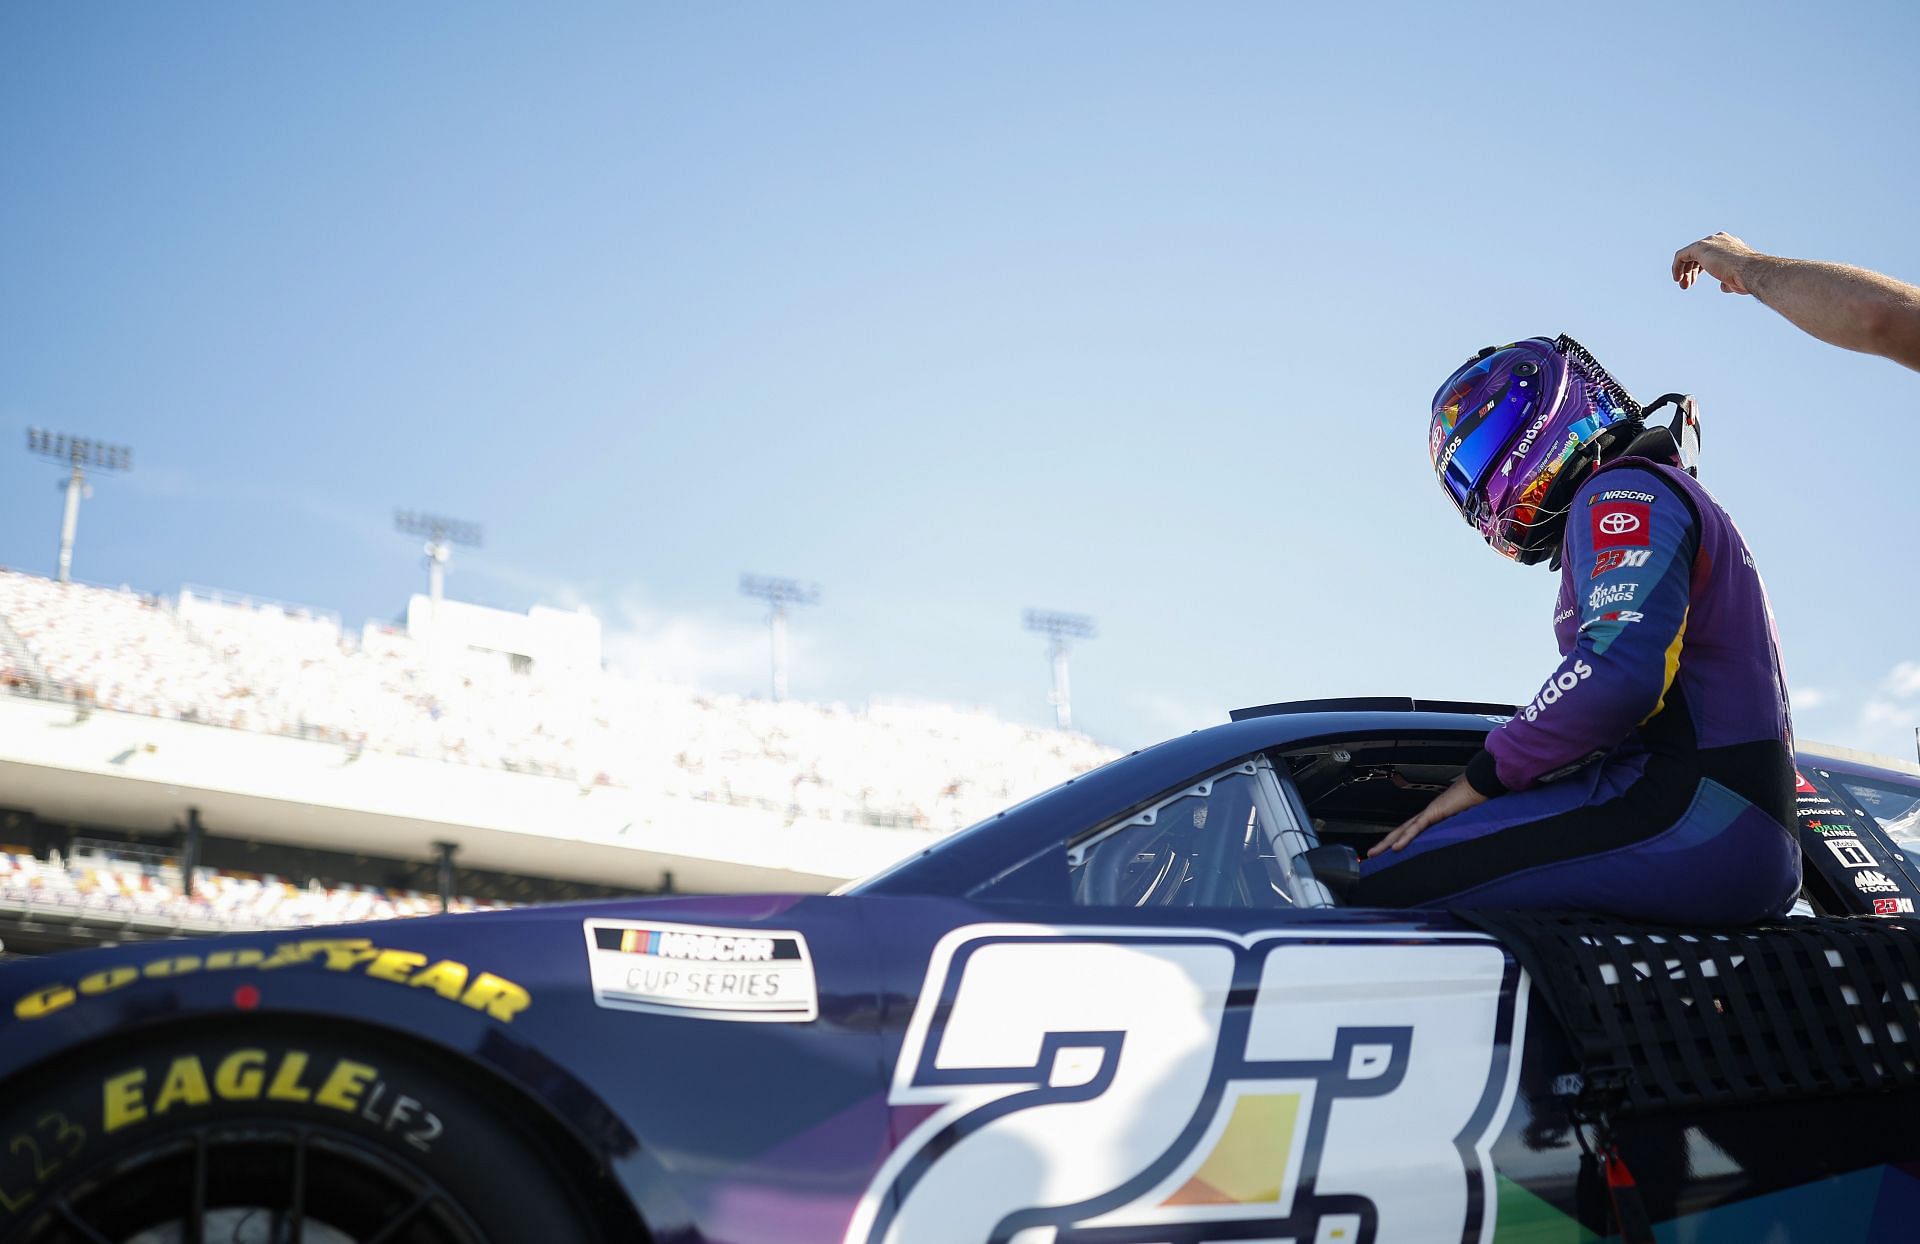 Bubba Wallace Jr. enters his car during qualifying for the 2022 NASCAR Cup Series Federated Auto Parts 400 at Richmond Raceway in Richmond, Virginia (Photo by Jared C. Tilton/Getty Images)